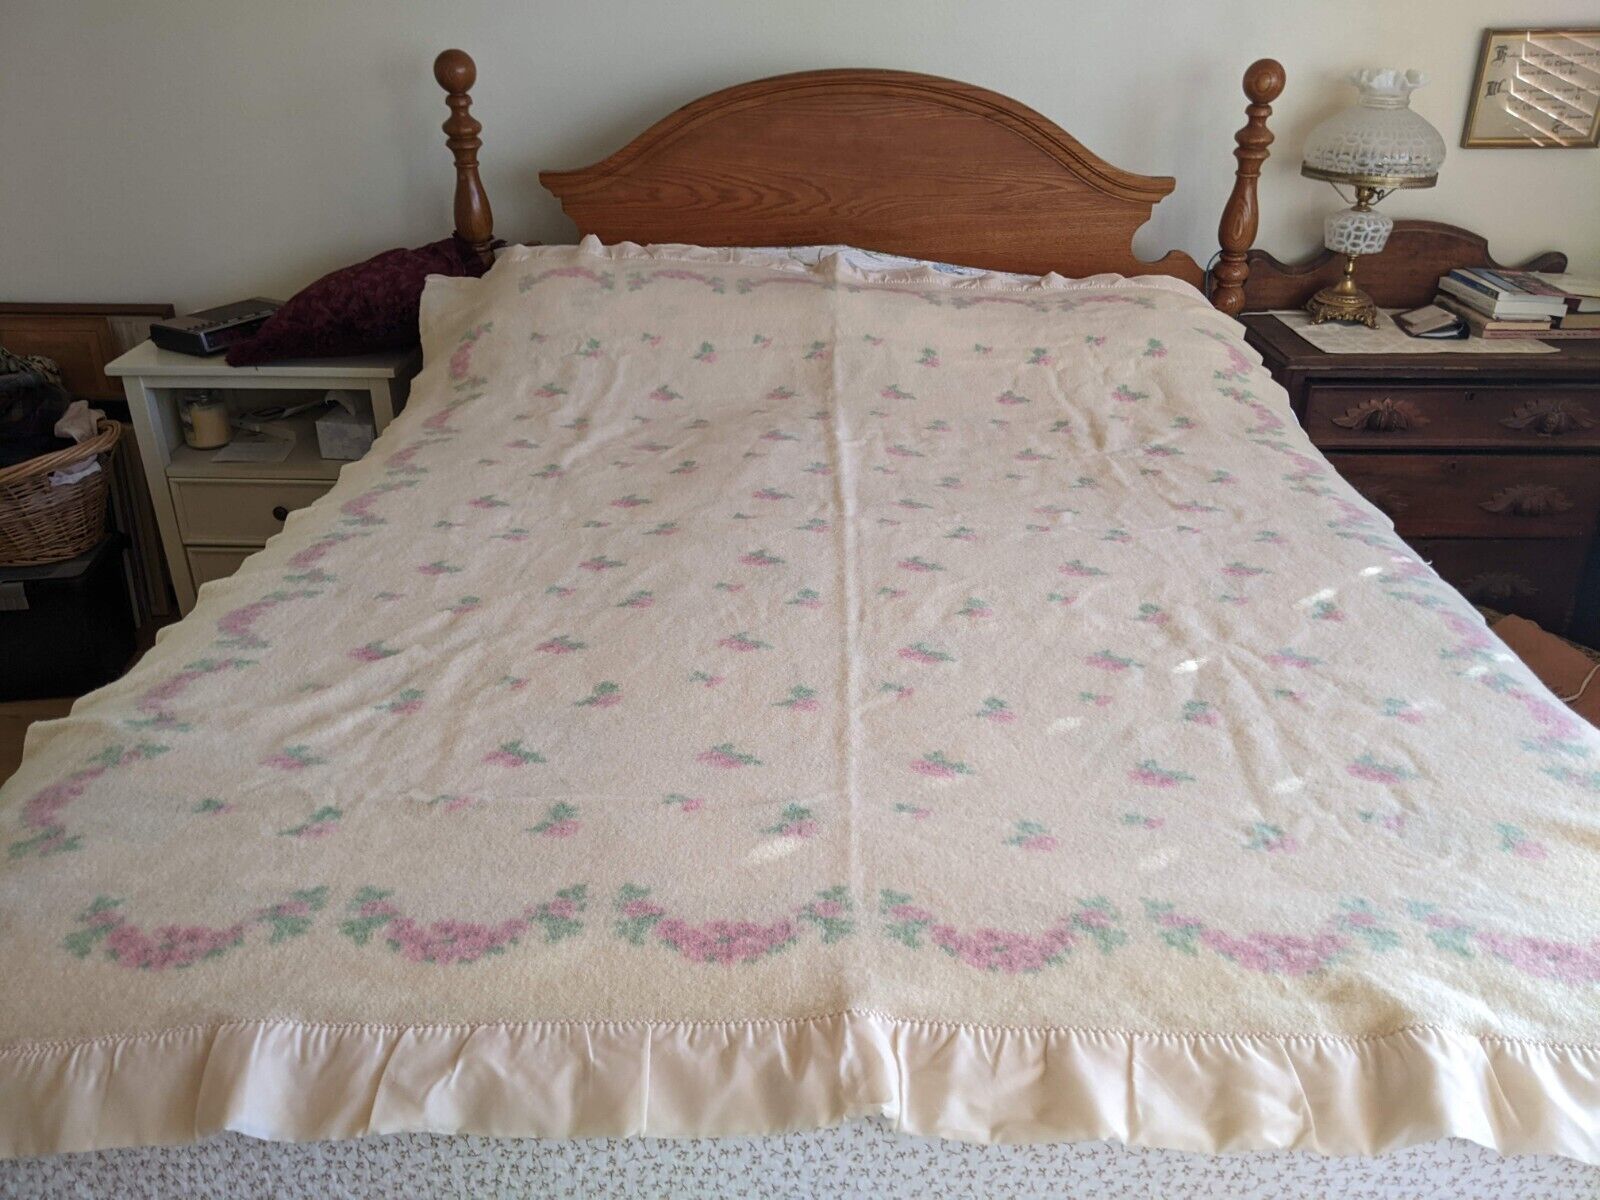 Vintage Chatham Wool Blanket Cream with Pink Flowers 76 x 62 in.